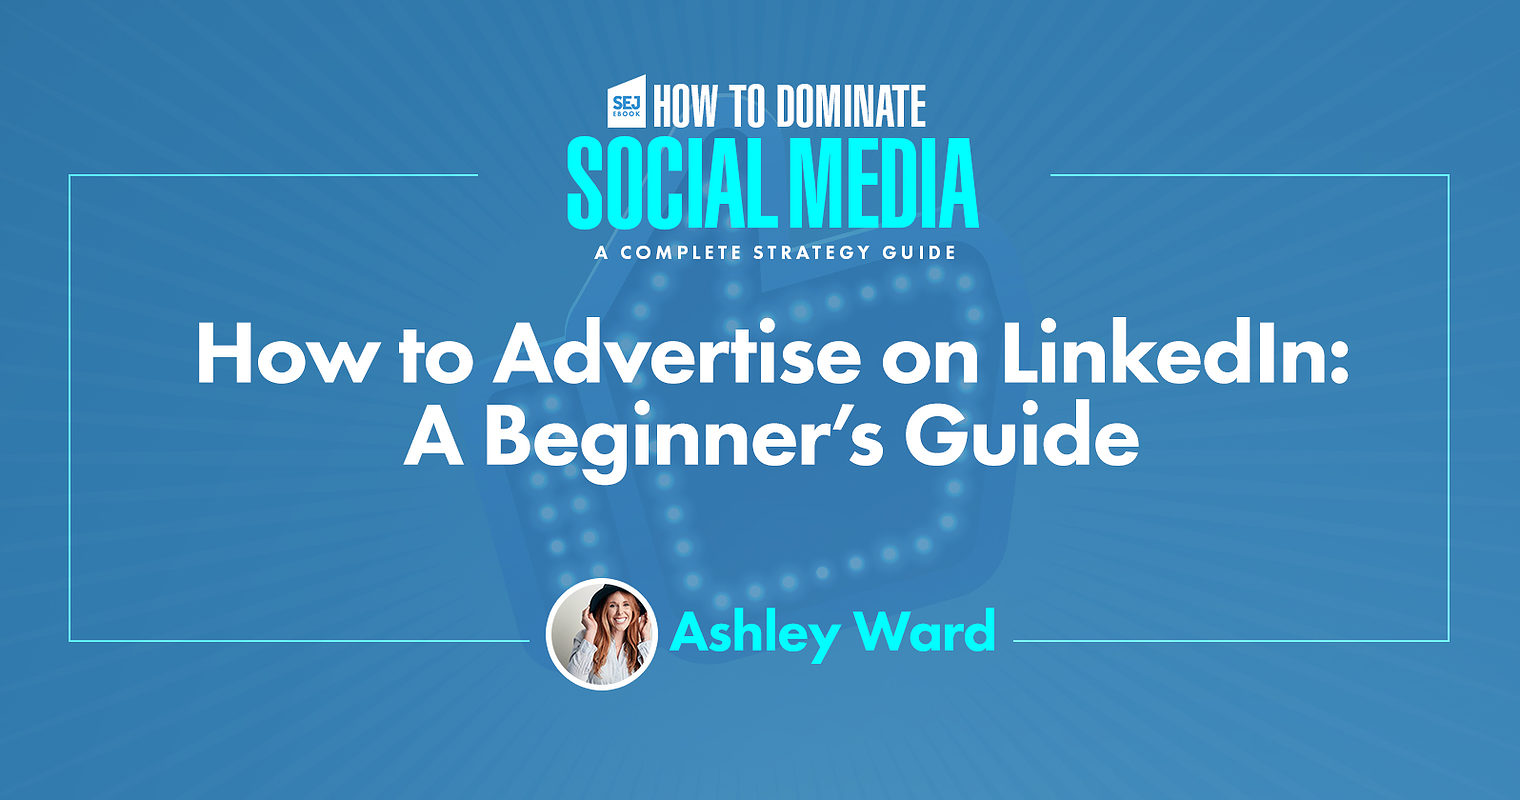 How to Advertise on LinkedIn: A Beginner’s Guide